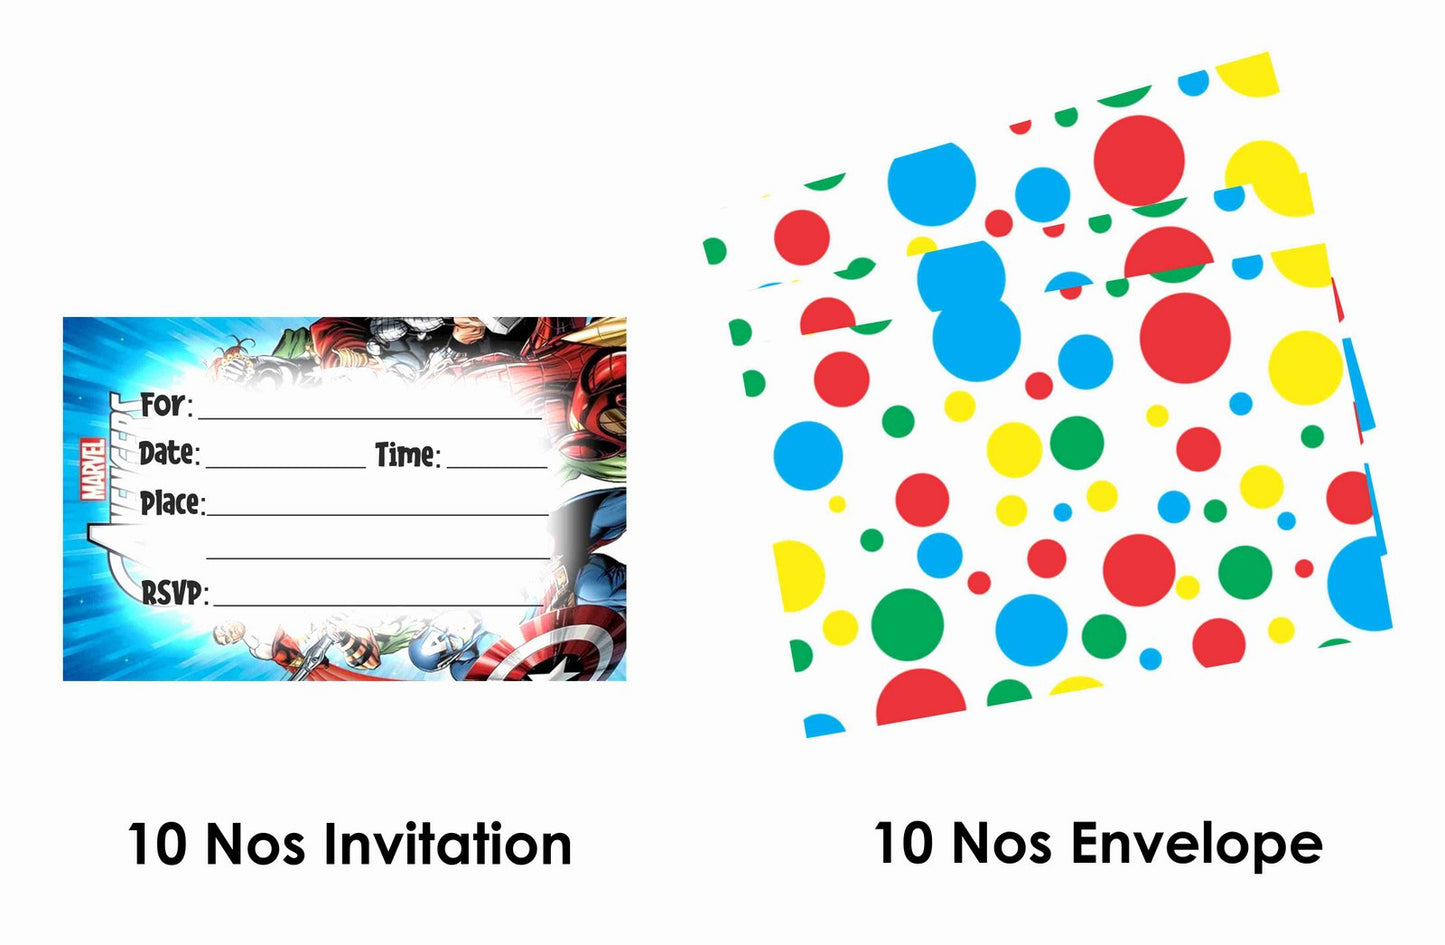 Superhero Theme Children's Birthday Party Invitations Cards with Envelopes - Kids Birthday Party Invitations for Boys or Girls,- Invitation Cards (Pack of 10)